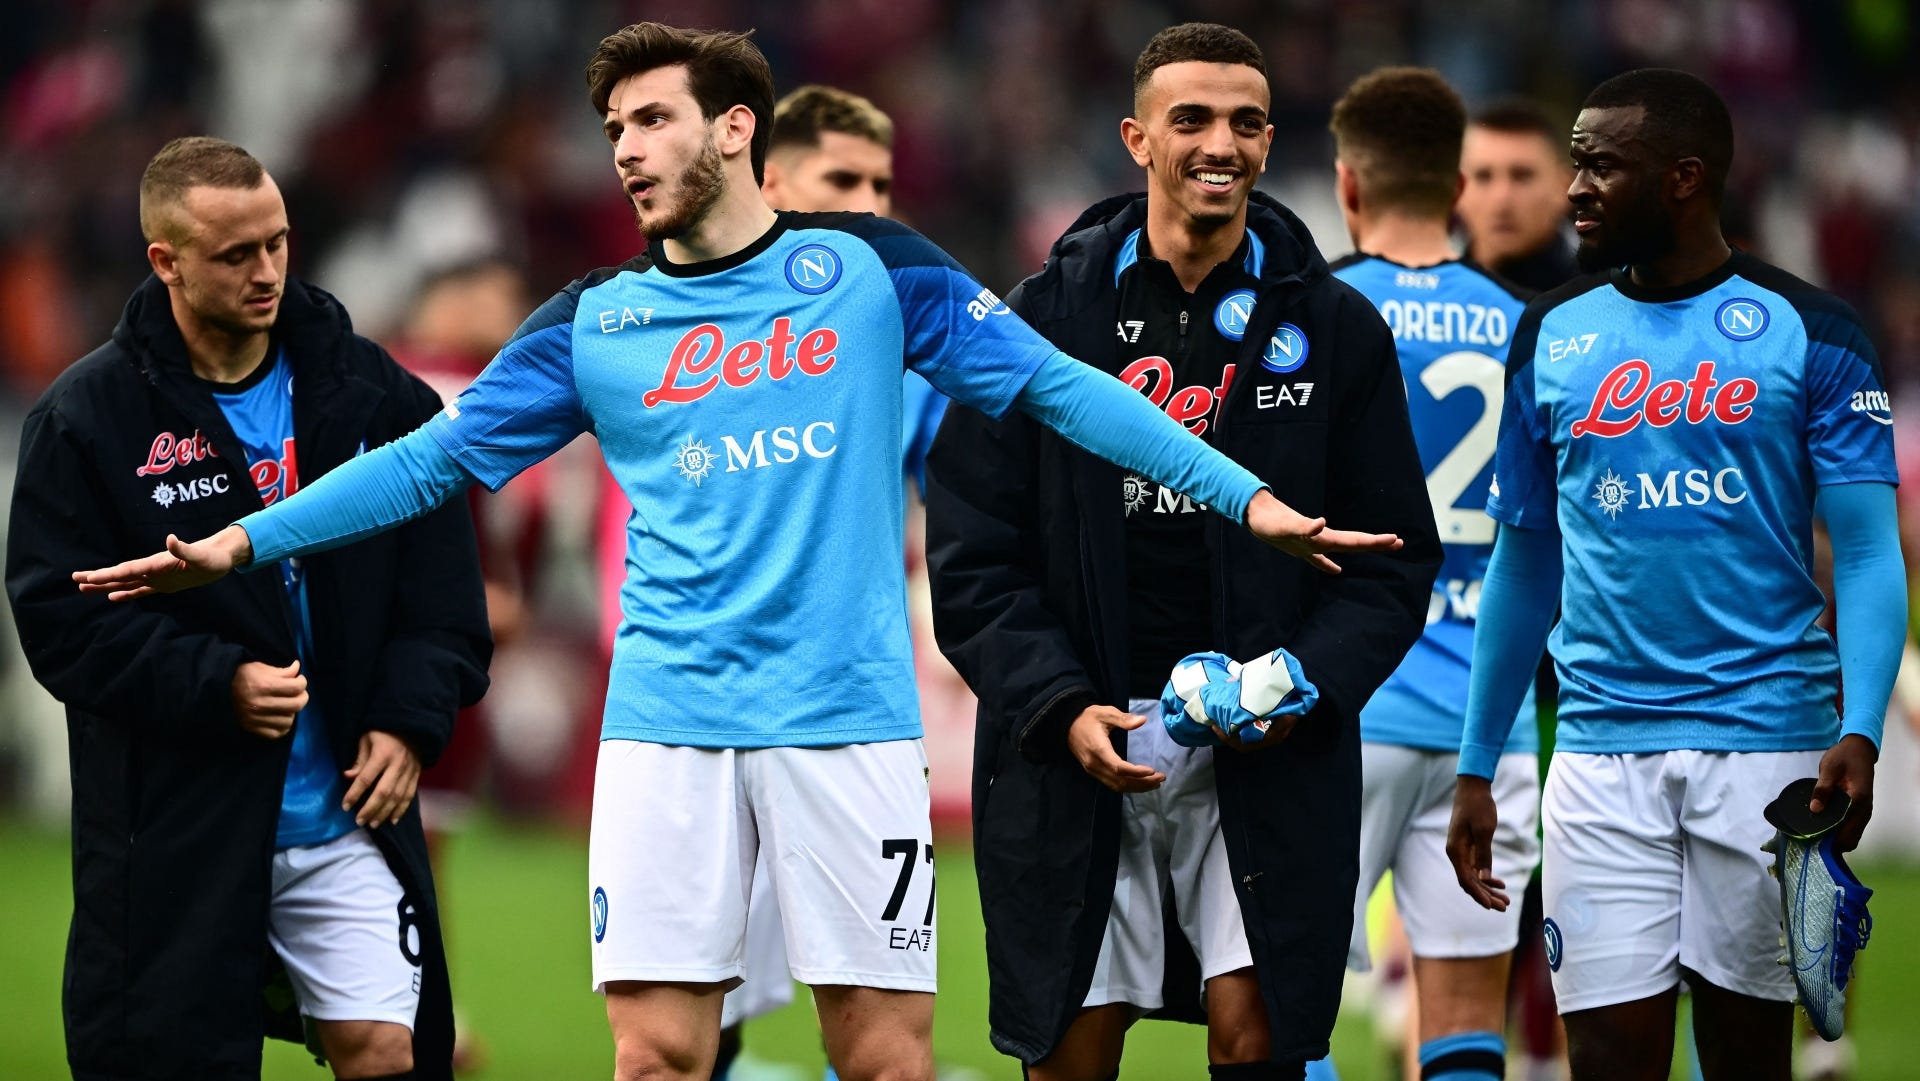 Napoli vs AC Milan Where to watch the match online, live stream, TV channels and kick-off time Goal UK